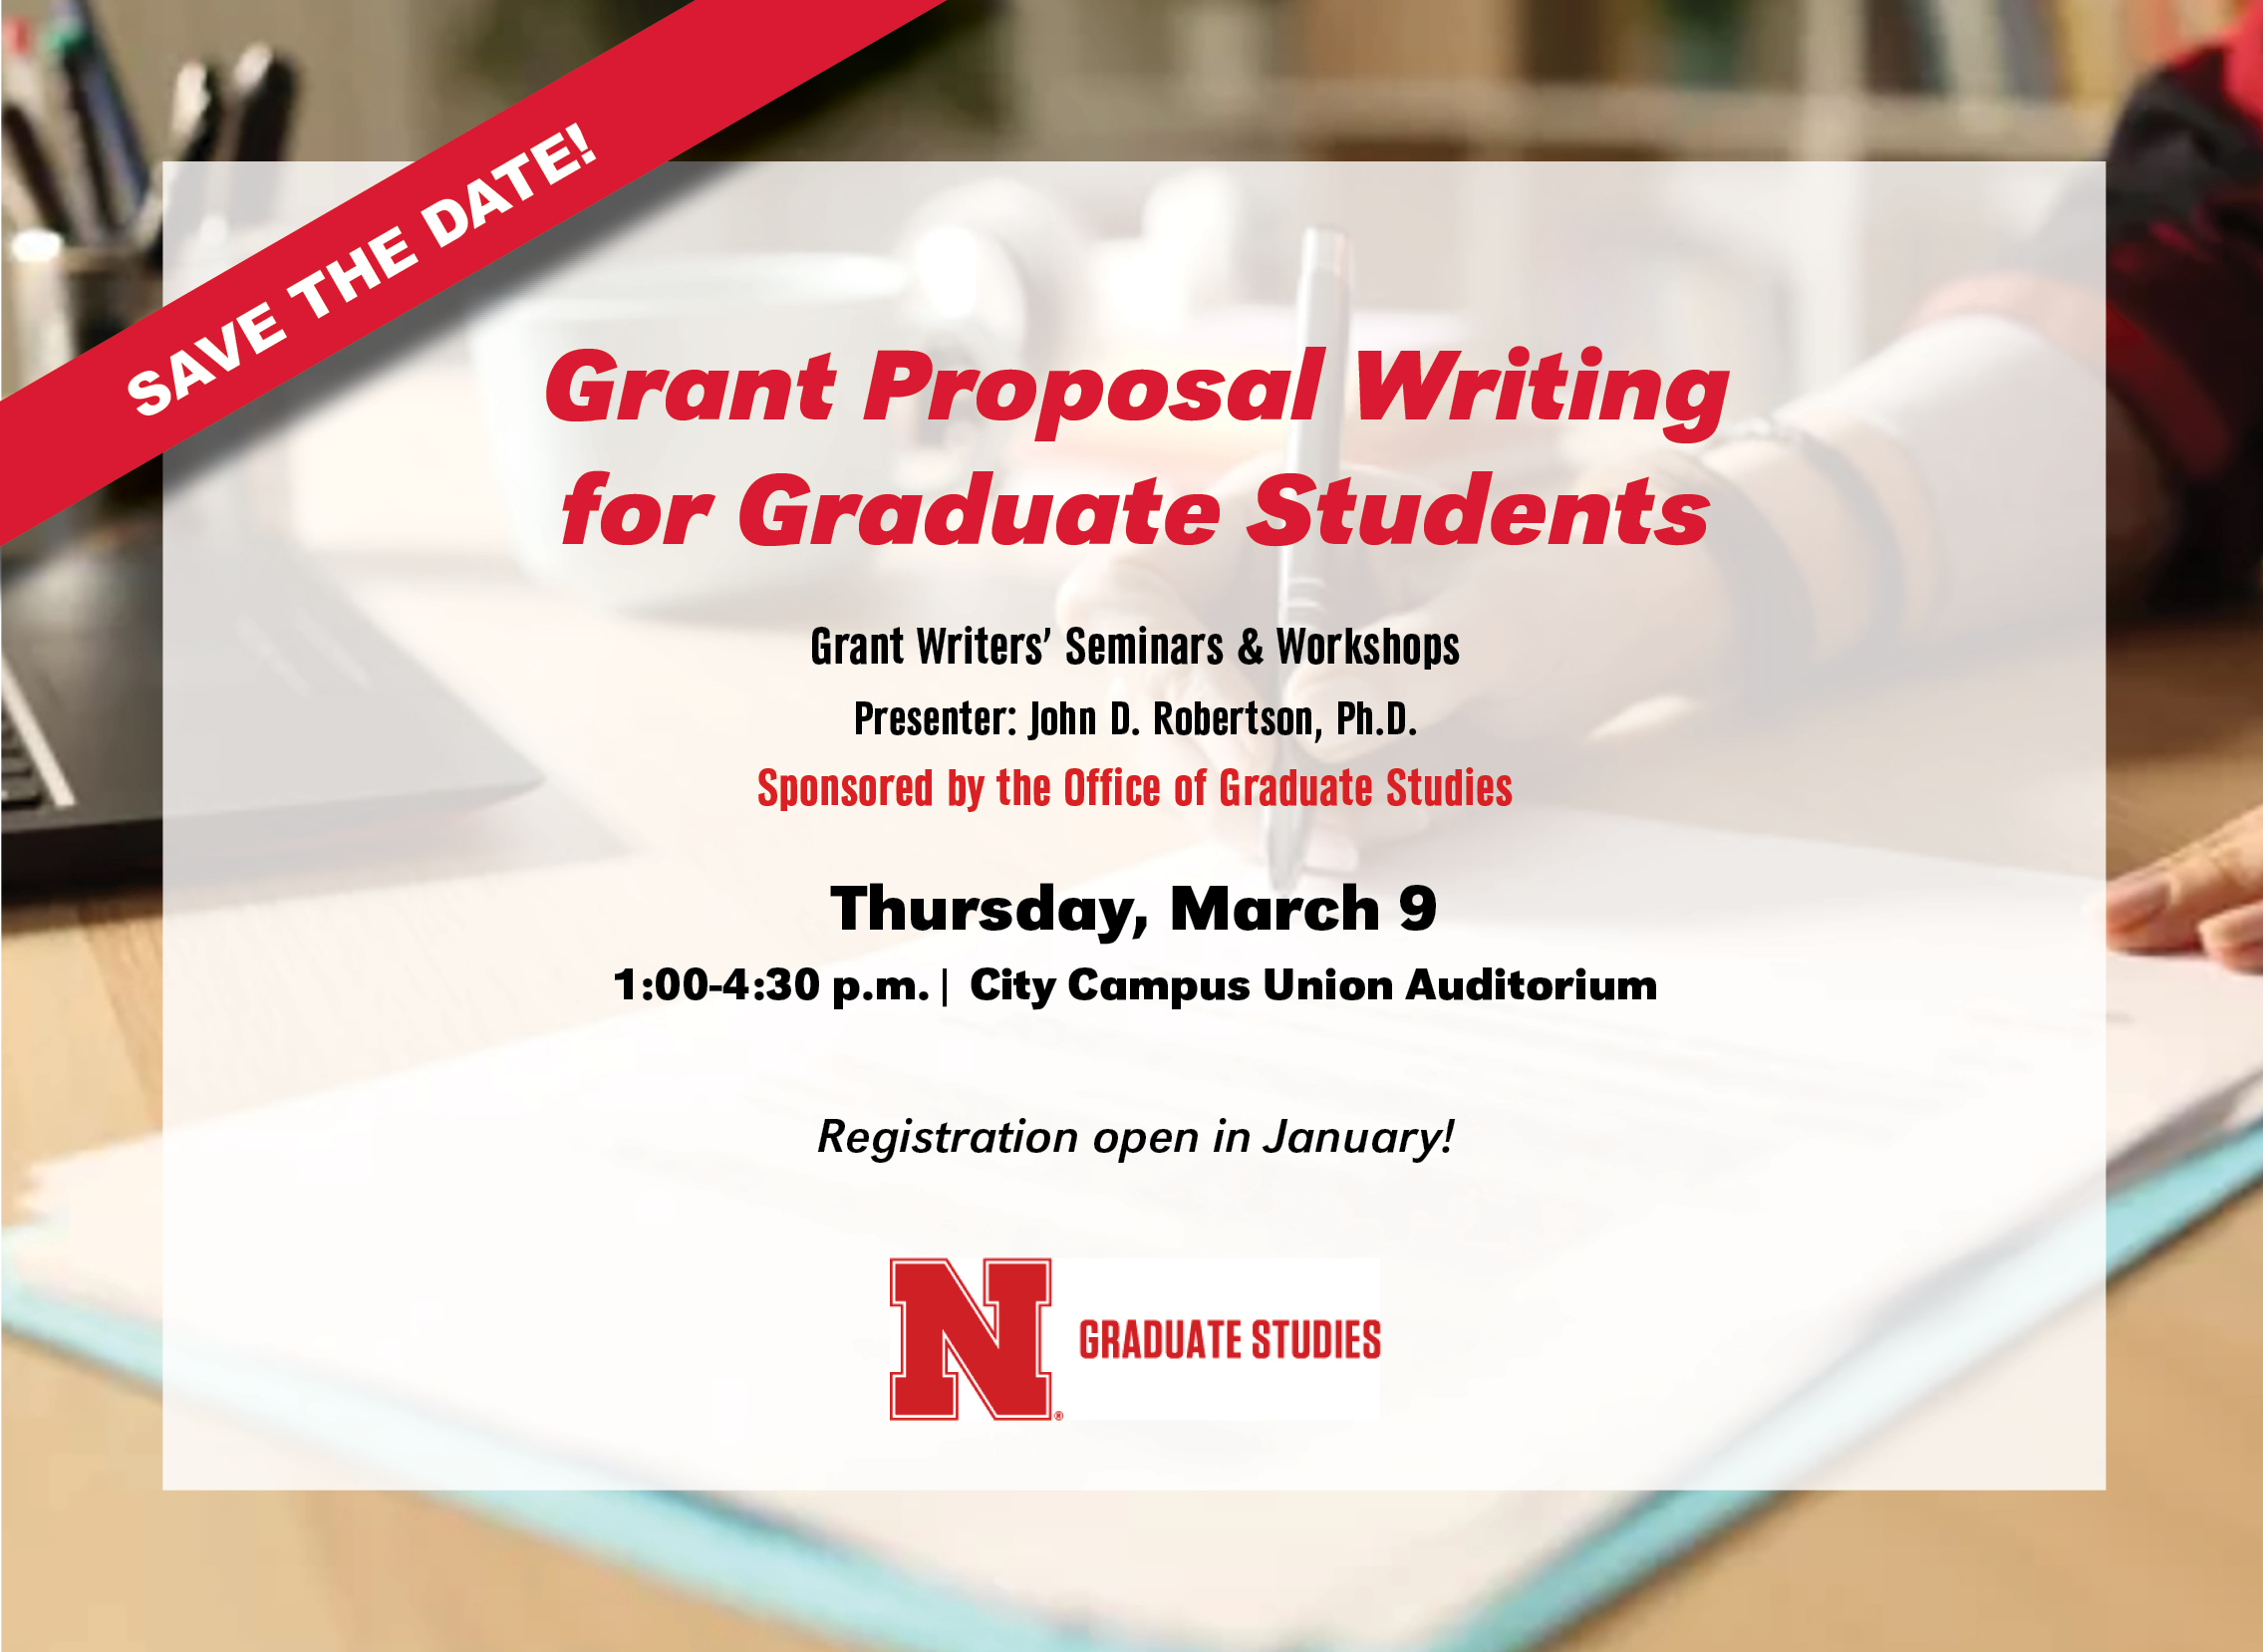 The seminar will comprehensively address both practical and conceptual aspects important to the proposal writing process, emphasizing idea development, identification of granting agencies, how to write for reviewers, and additional tips and strategies of 